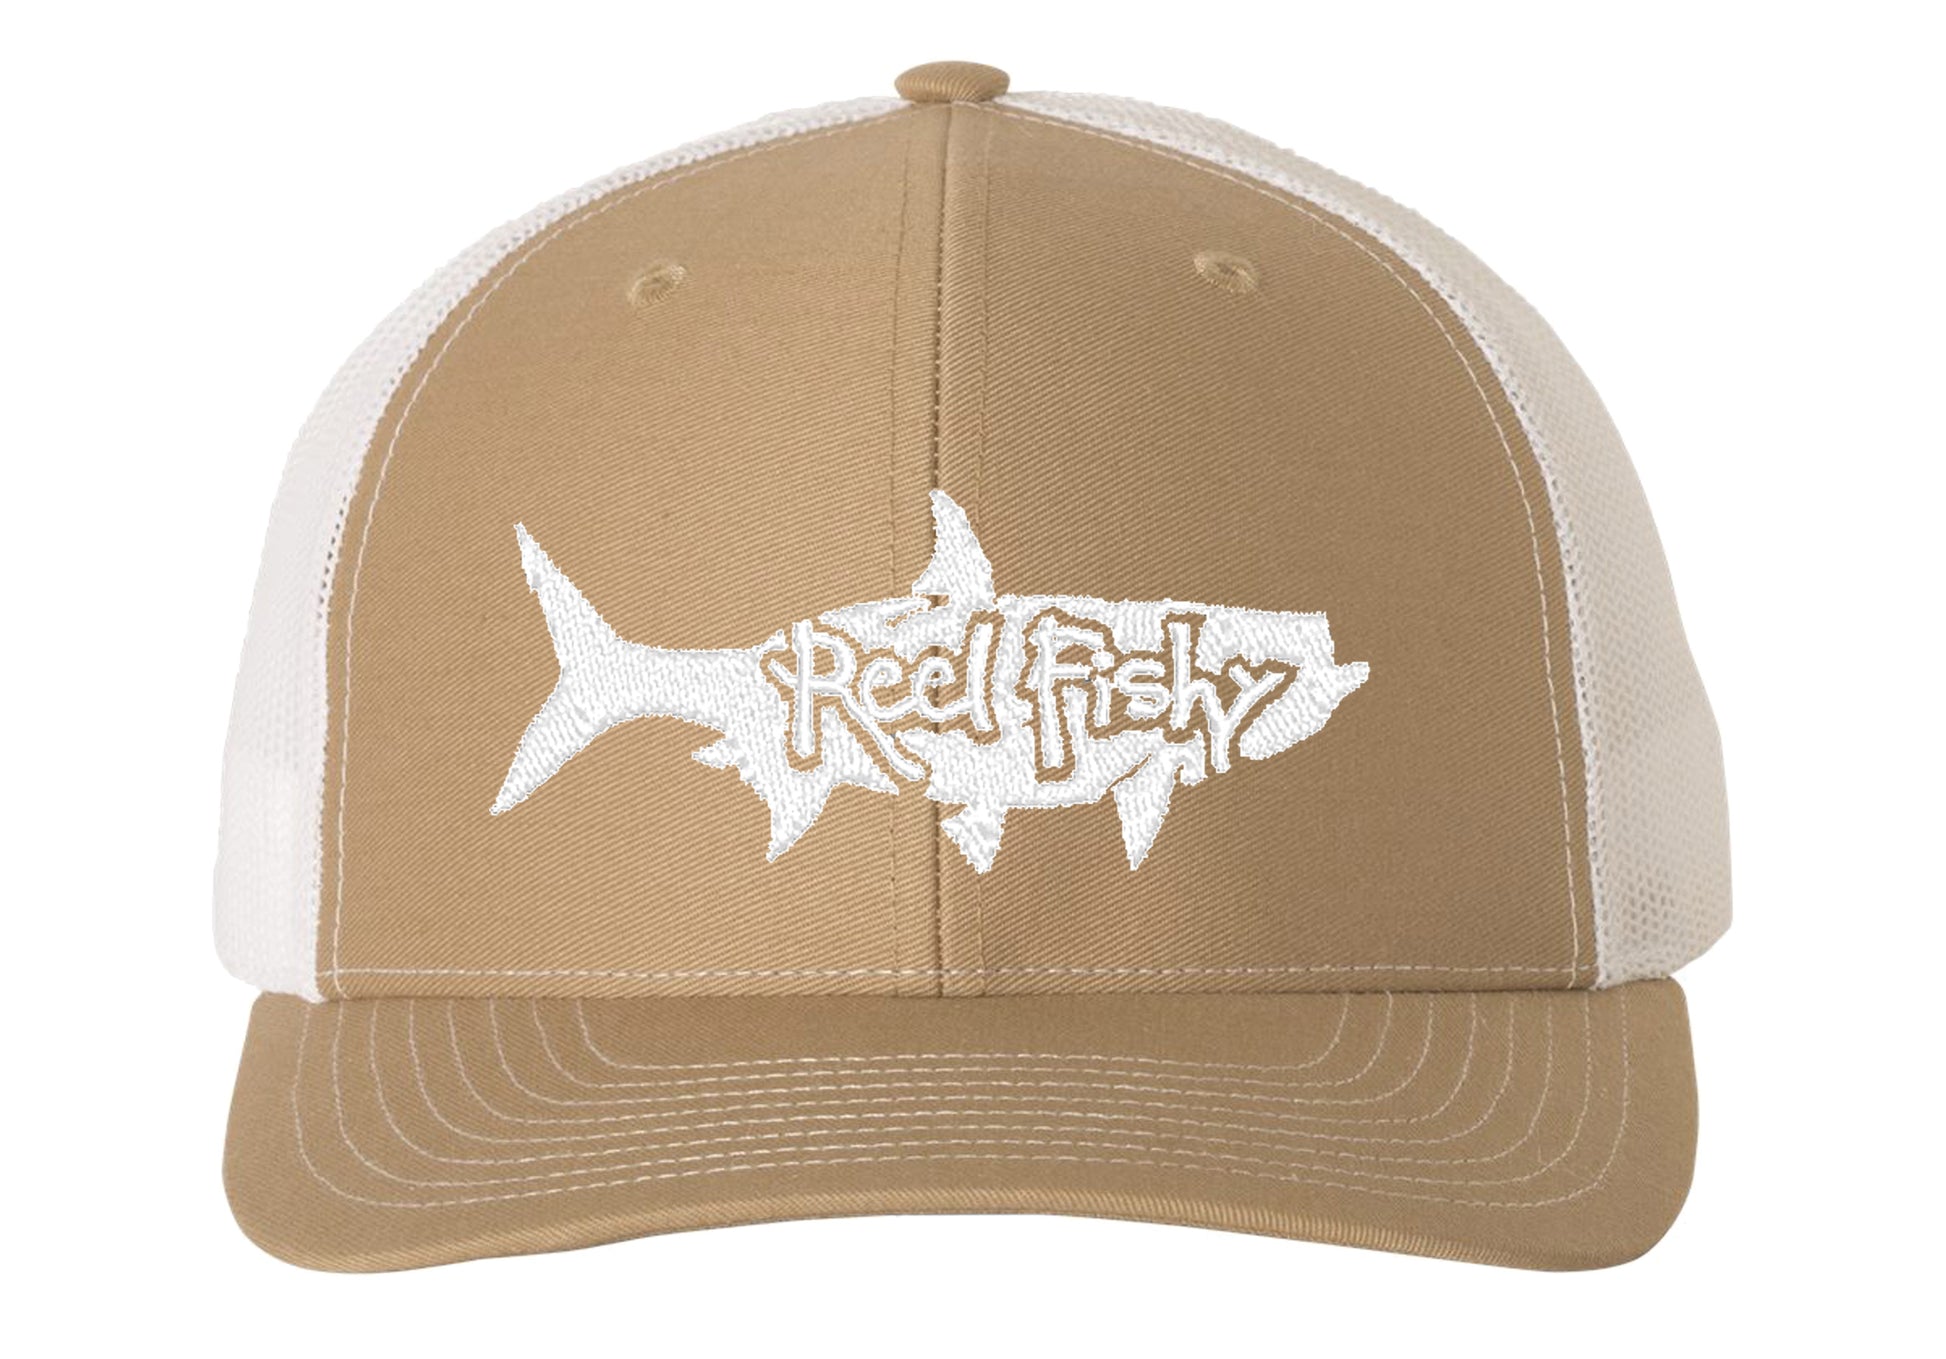 Tarpon Fishing Structured Trucker Hats with Snapback Closure - *23 Colors!